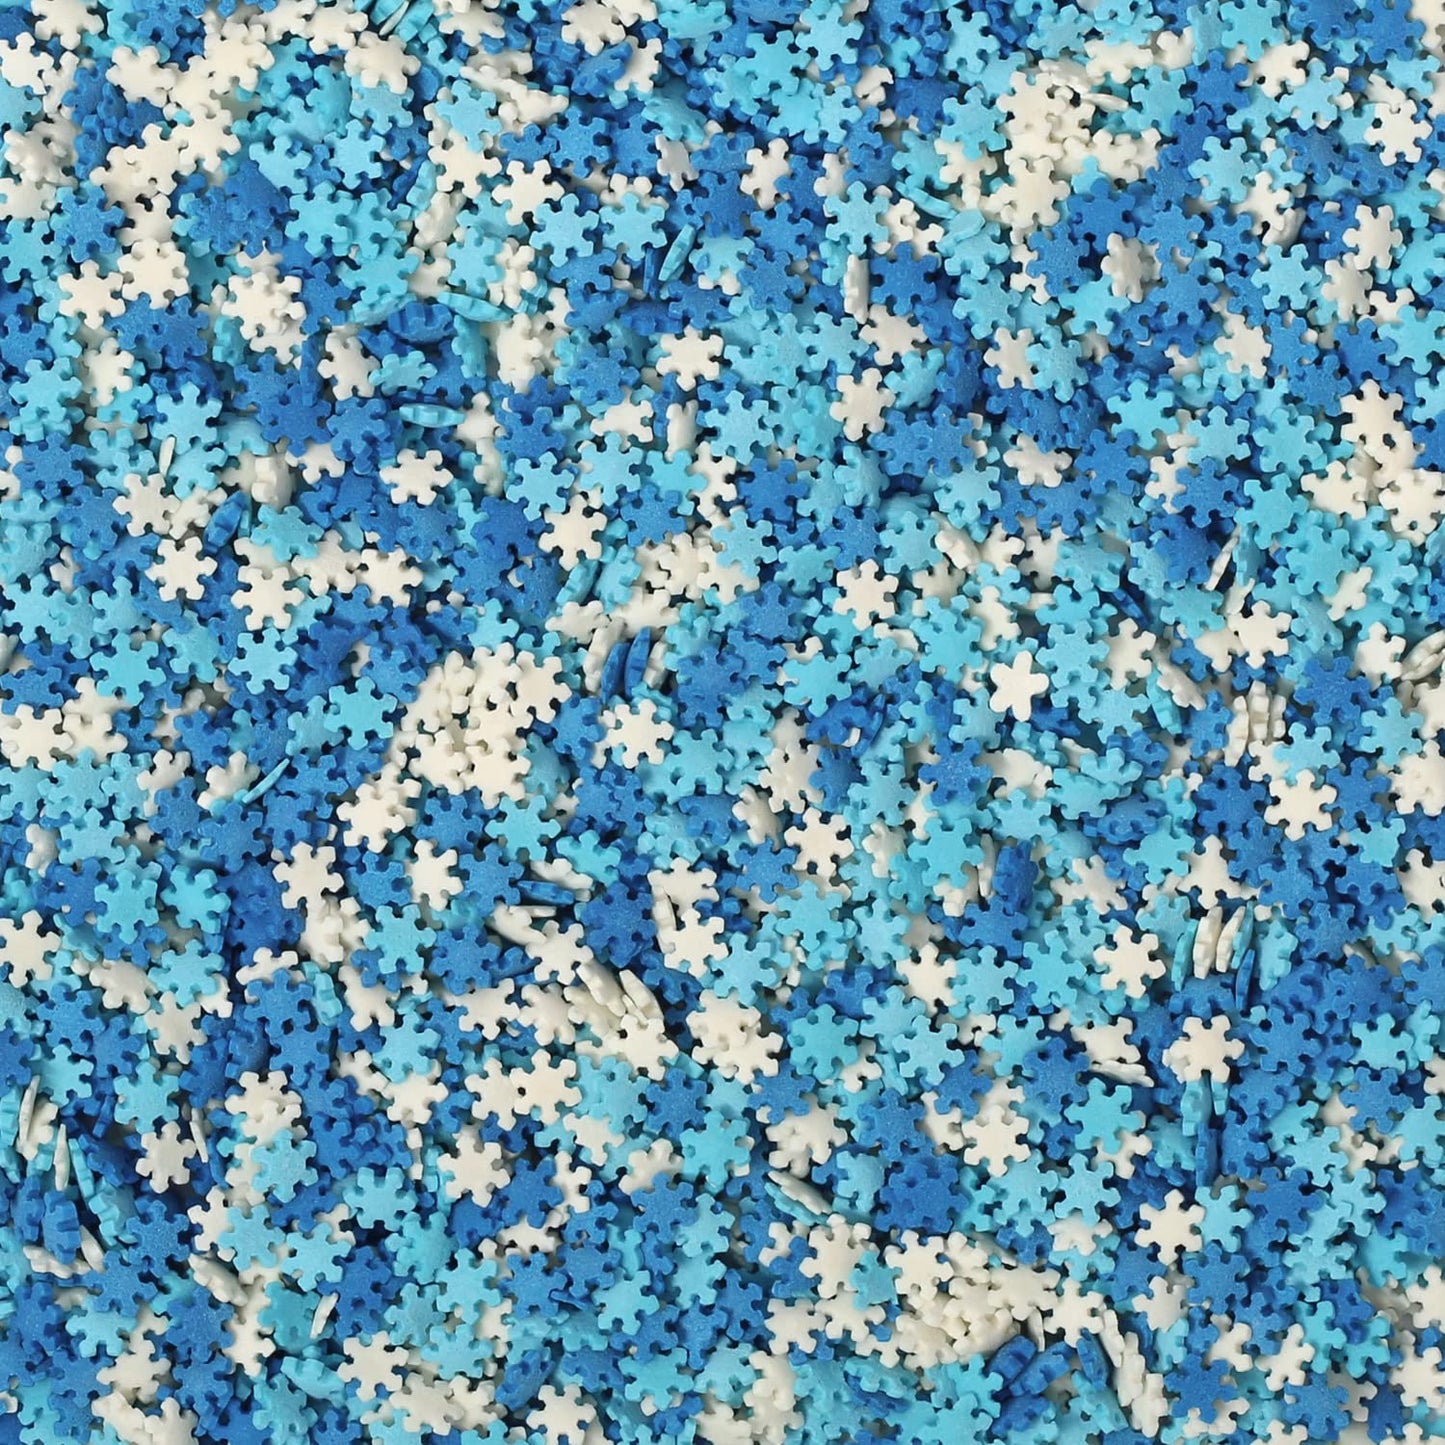 Snowflake Confetti Sprinkles - 10 ounces - Winter Snow Confetti - Candy Dessert Toppings for Cake, Cupcake, Cookie Decorating